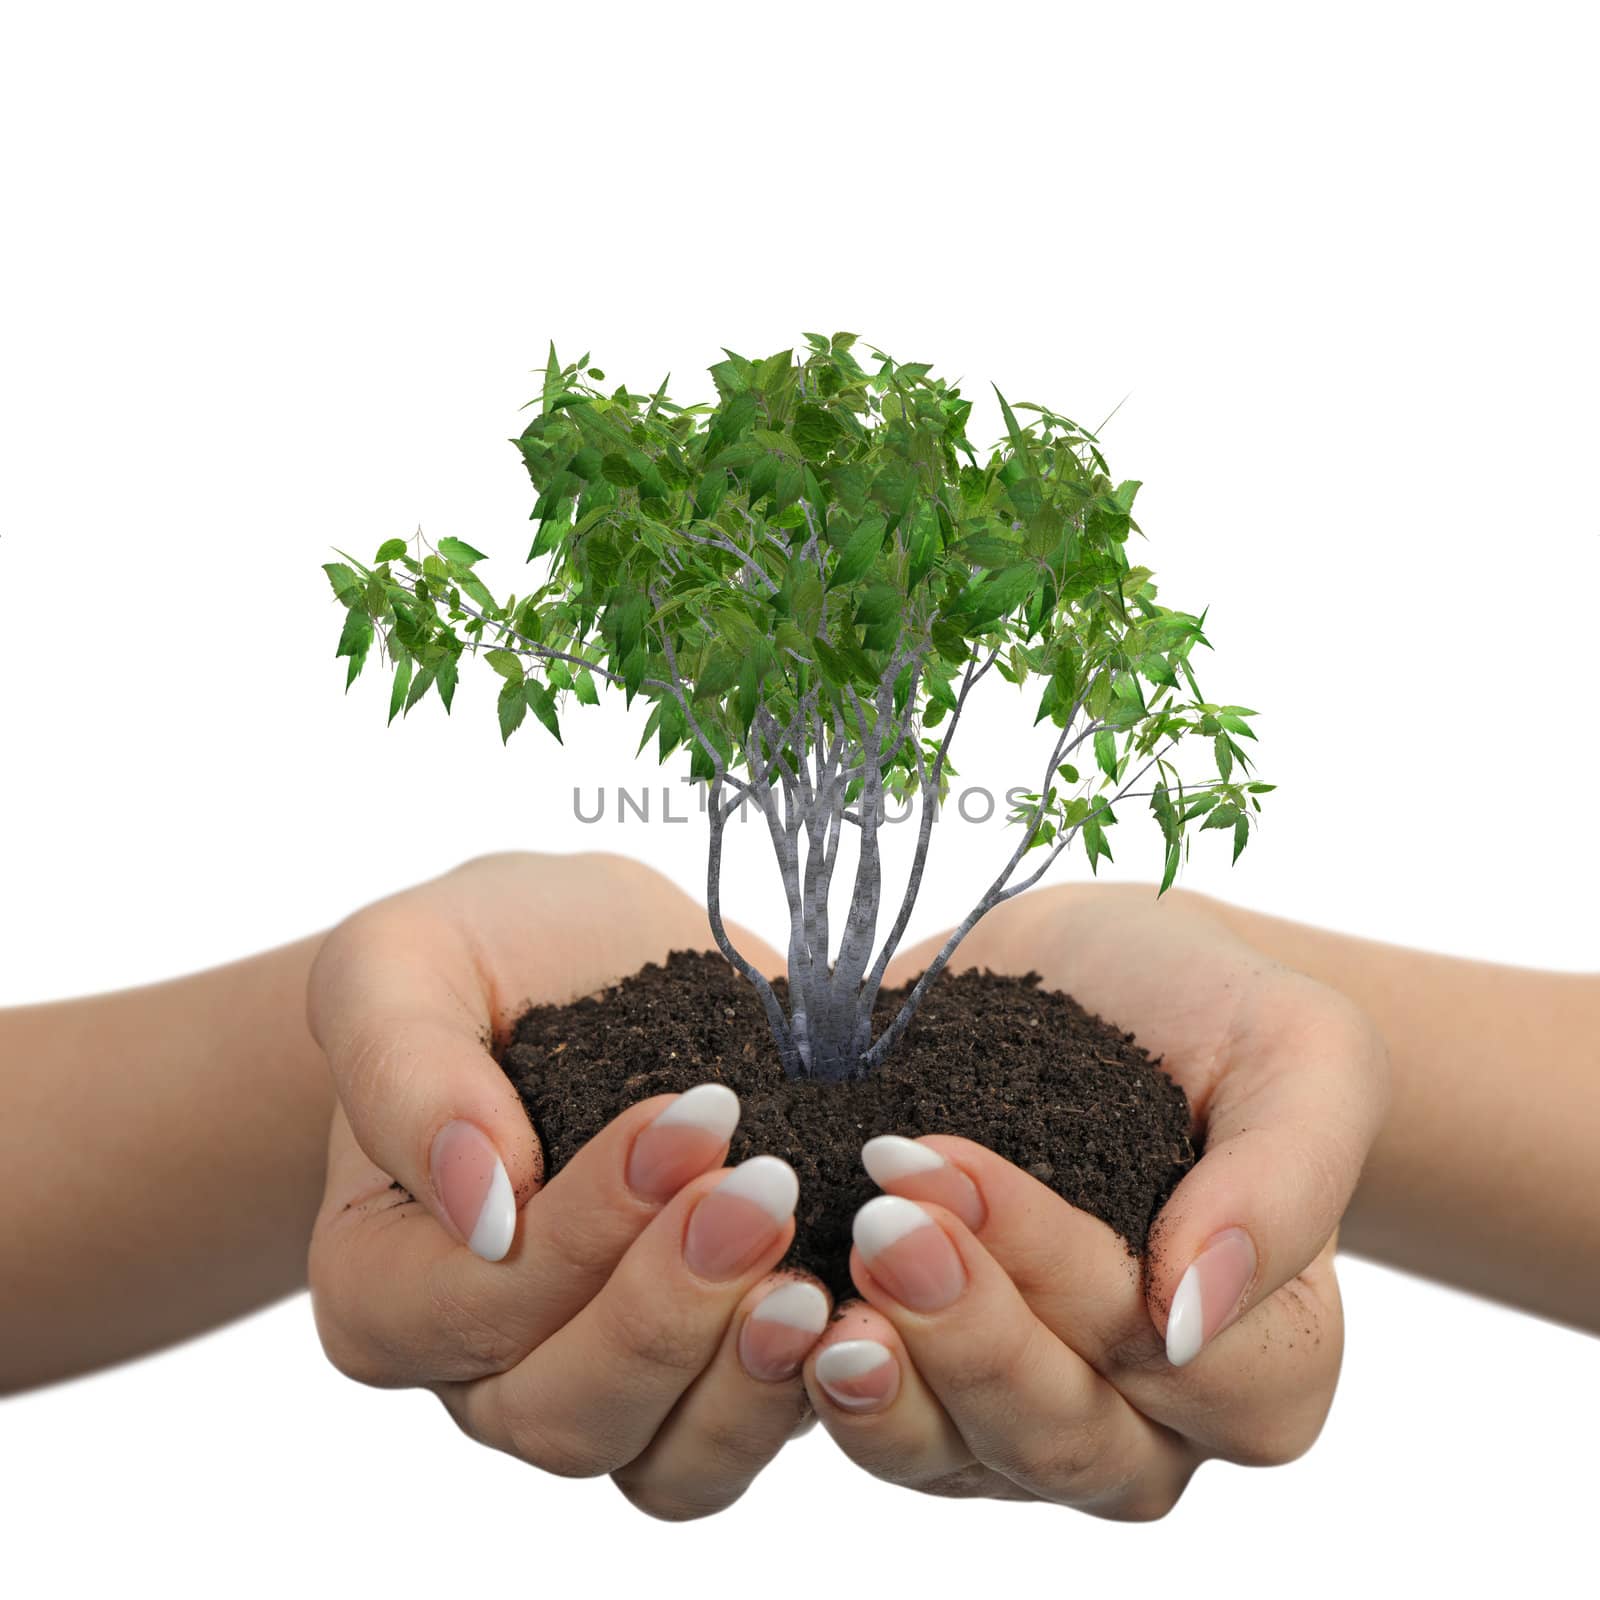 Female hands with soil and a plant. It is isolated on a white background